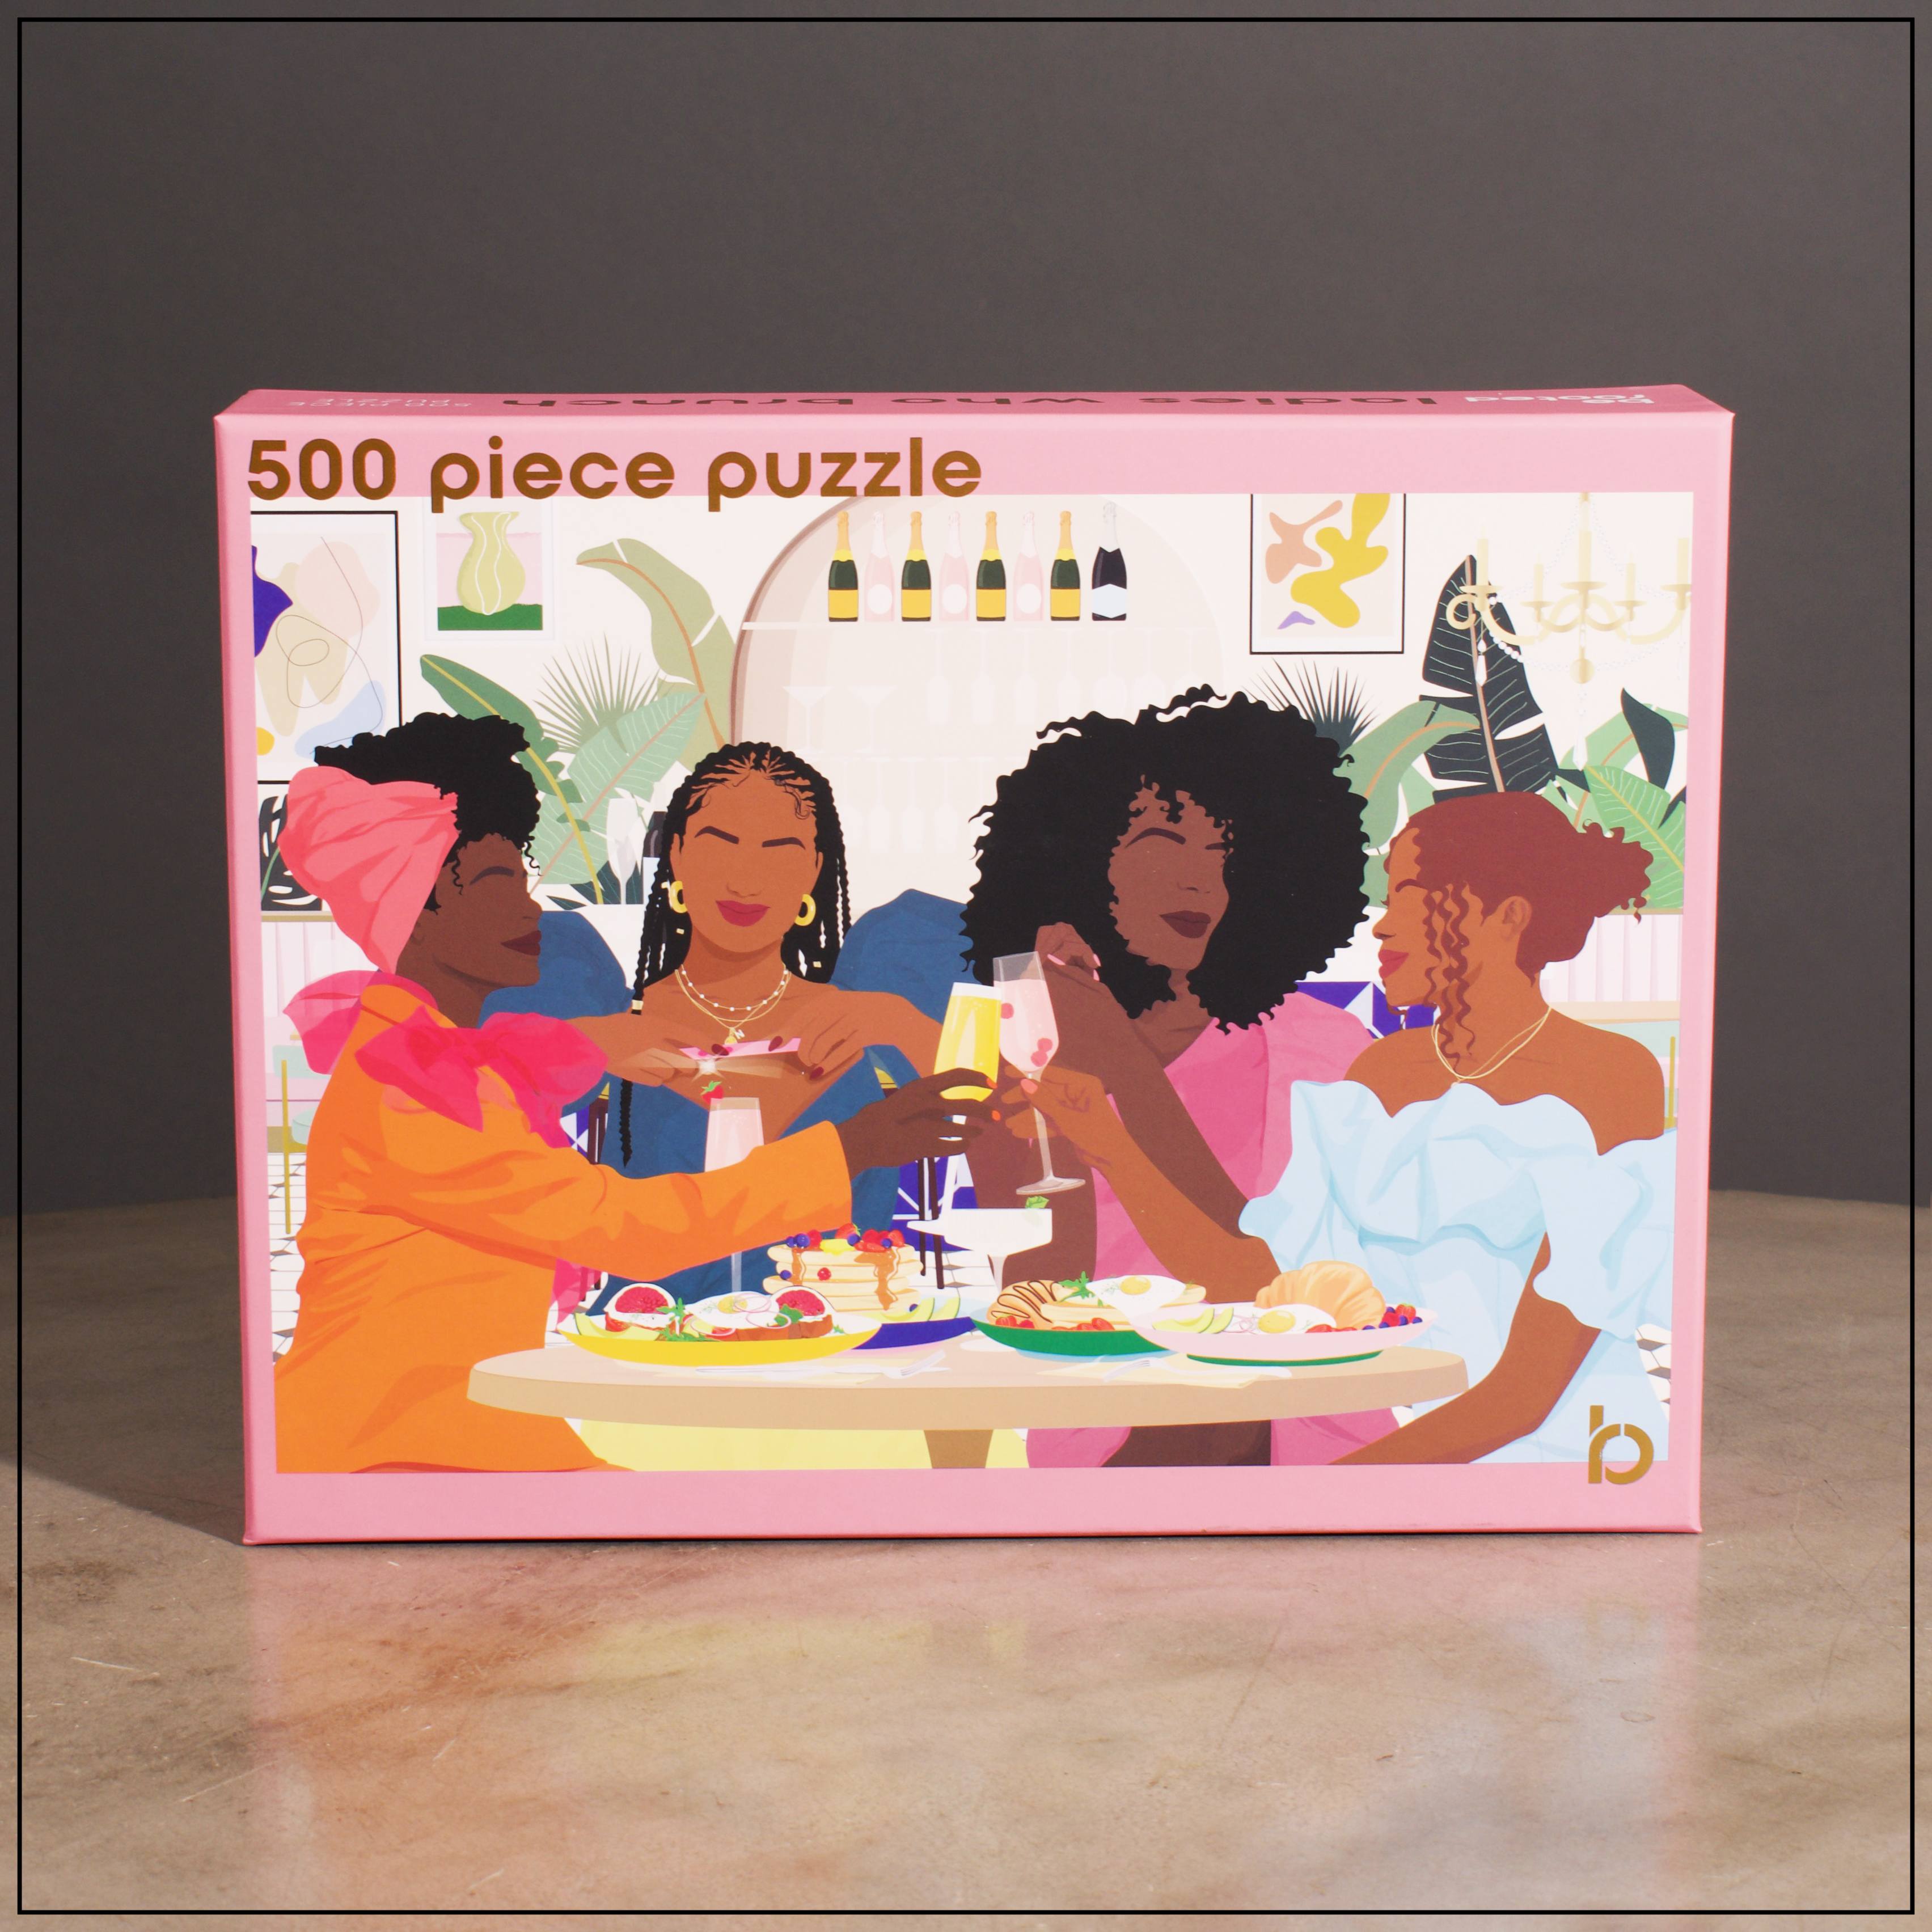 Ladies Who Brunch 500 Piece Puzzle - 500 pieces with a soft-touch finish Includes a photo of the completed puzzle Comes in a box for safekeeping  Dimensions: 14”x20”  Hand-drawn artwork Clink, clink. Nom, nom. Bring brunch home with a 500-piece puzzle made to honor everyone’s favorite snacking and sipping social gathering — reservations not required. Features a beautiful, hand-drawn image of four ladies cheersing, noshing and living their best brunch lives. Comes in a puzzle box with luxe gold foil lettering.